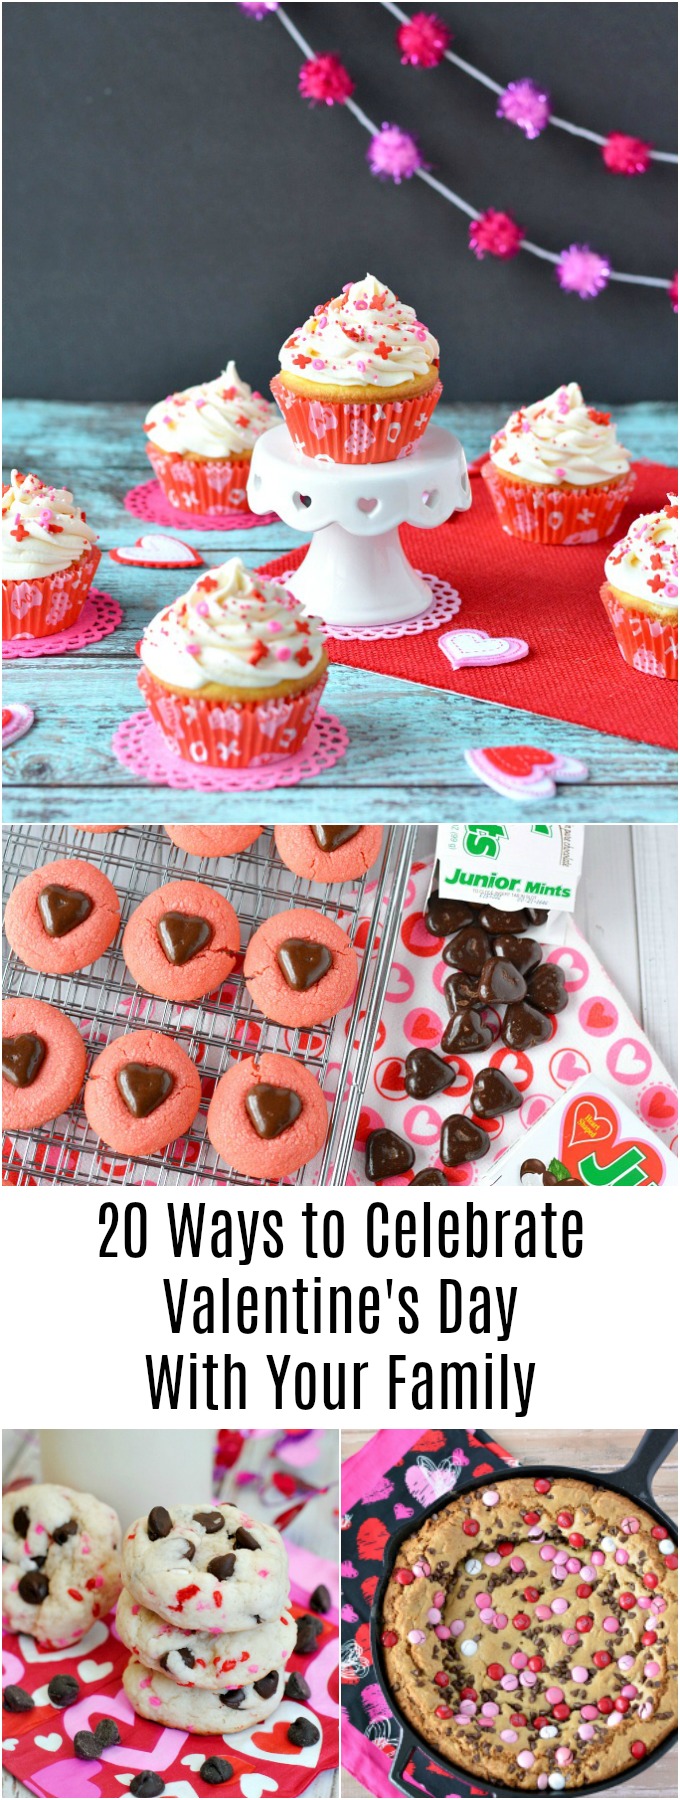 20 Ways to Celebrate Valentine's Day With Your Family